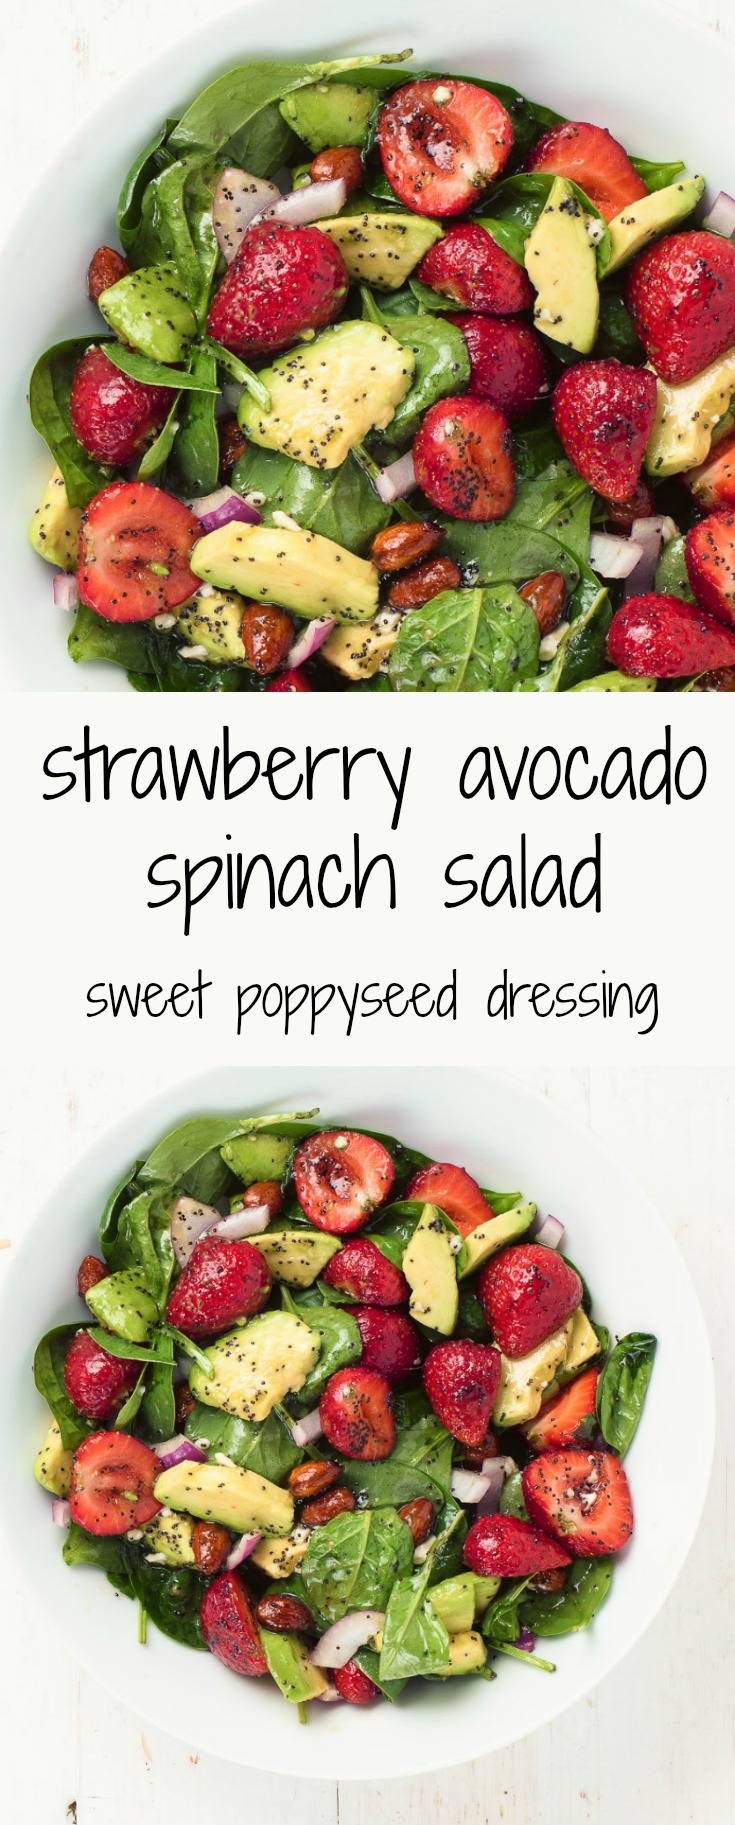 spinach salad with strawberries, avocado and poppyseed dressing